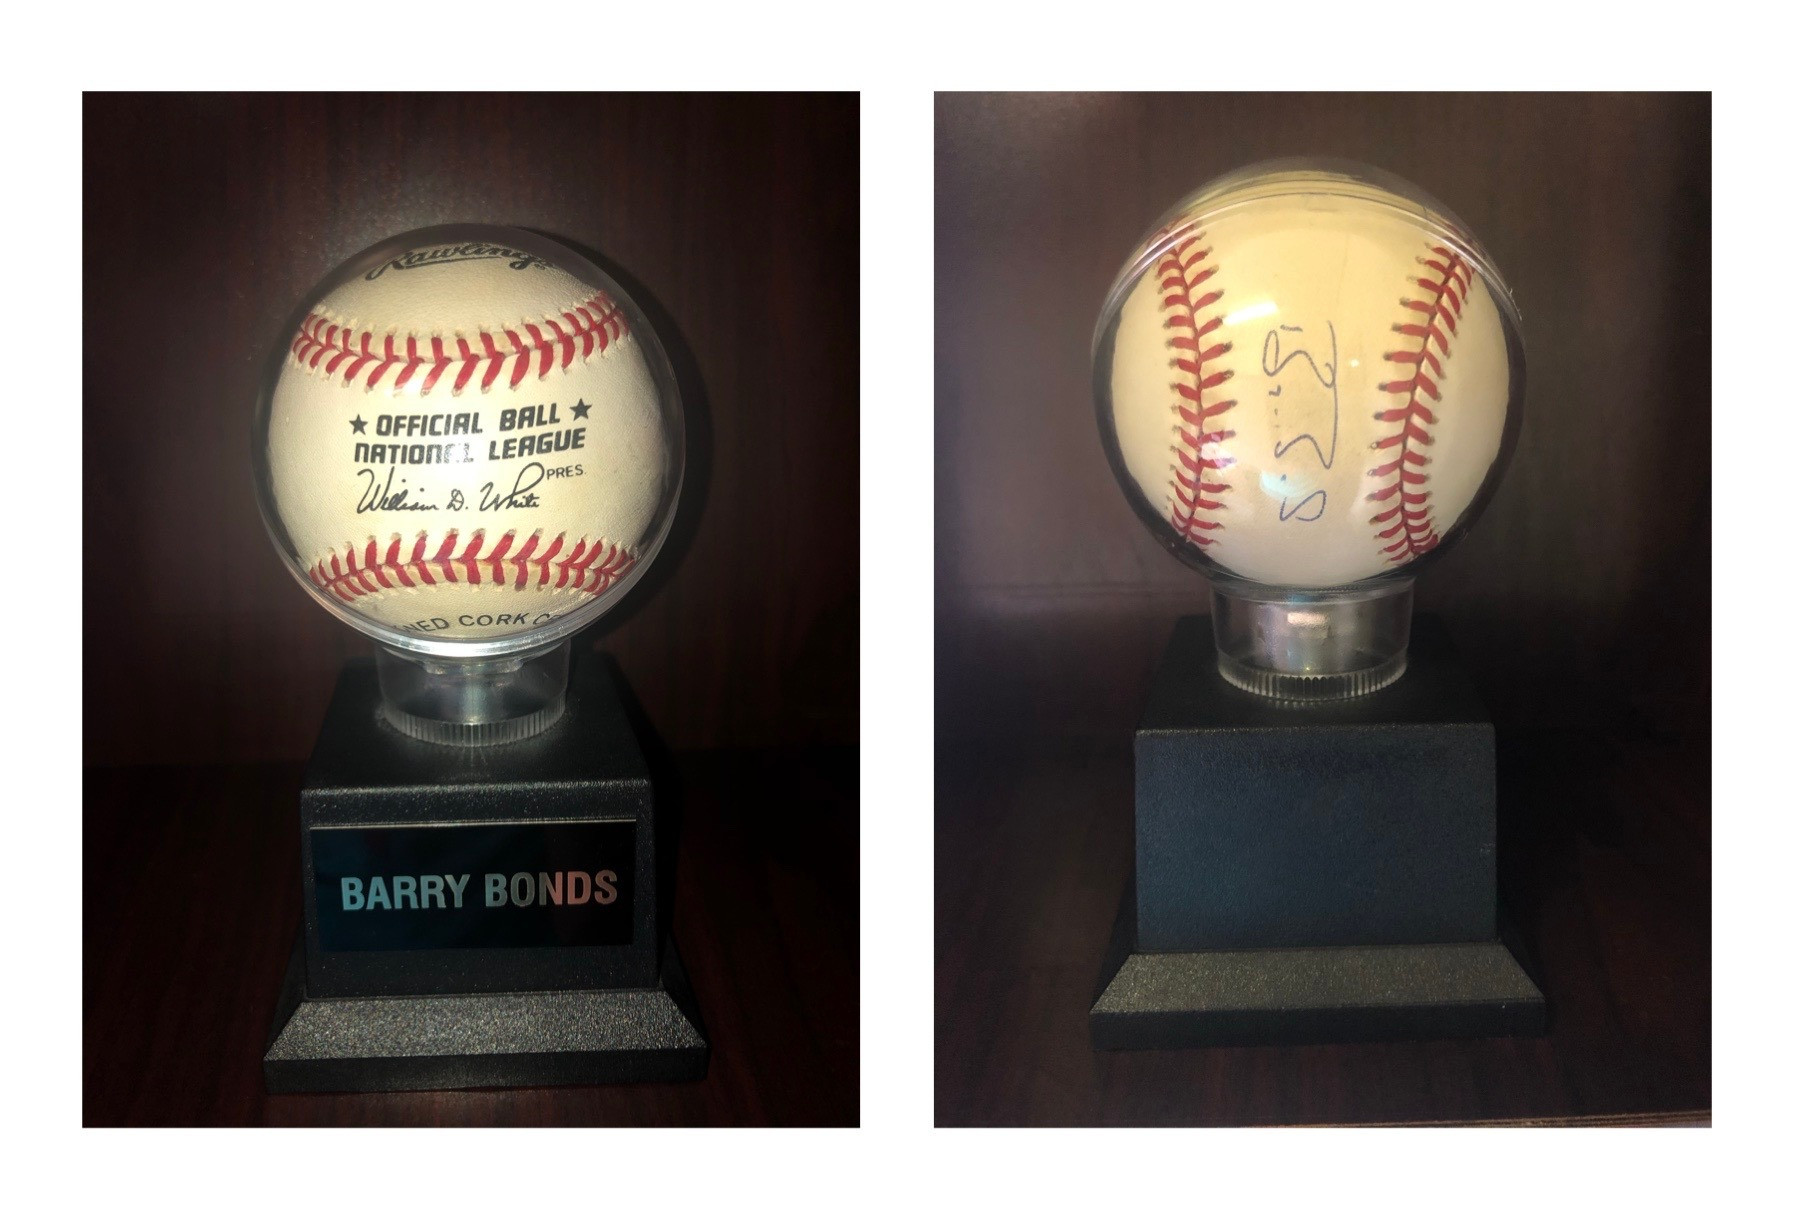 Official Ball of the National League autographed by Barry Bonds. The ball is encased with a stand and engraving that reads, "Barry Bonds."